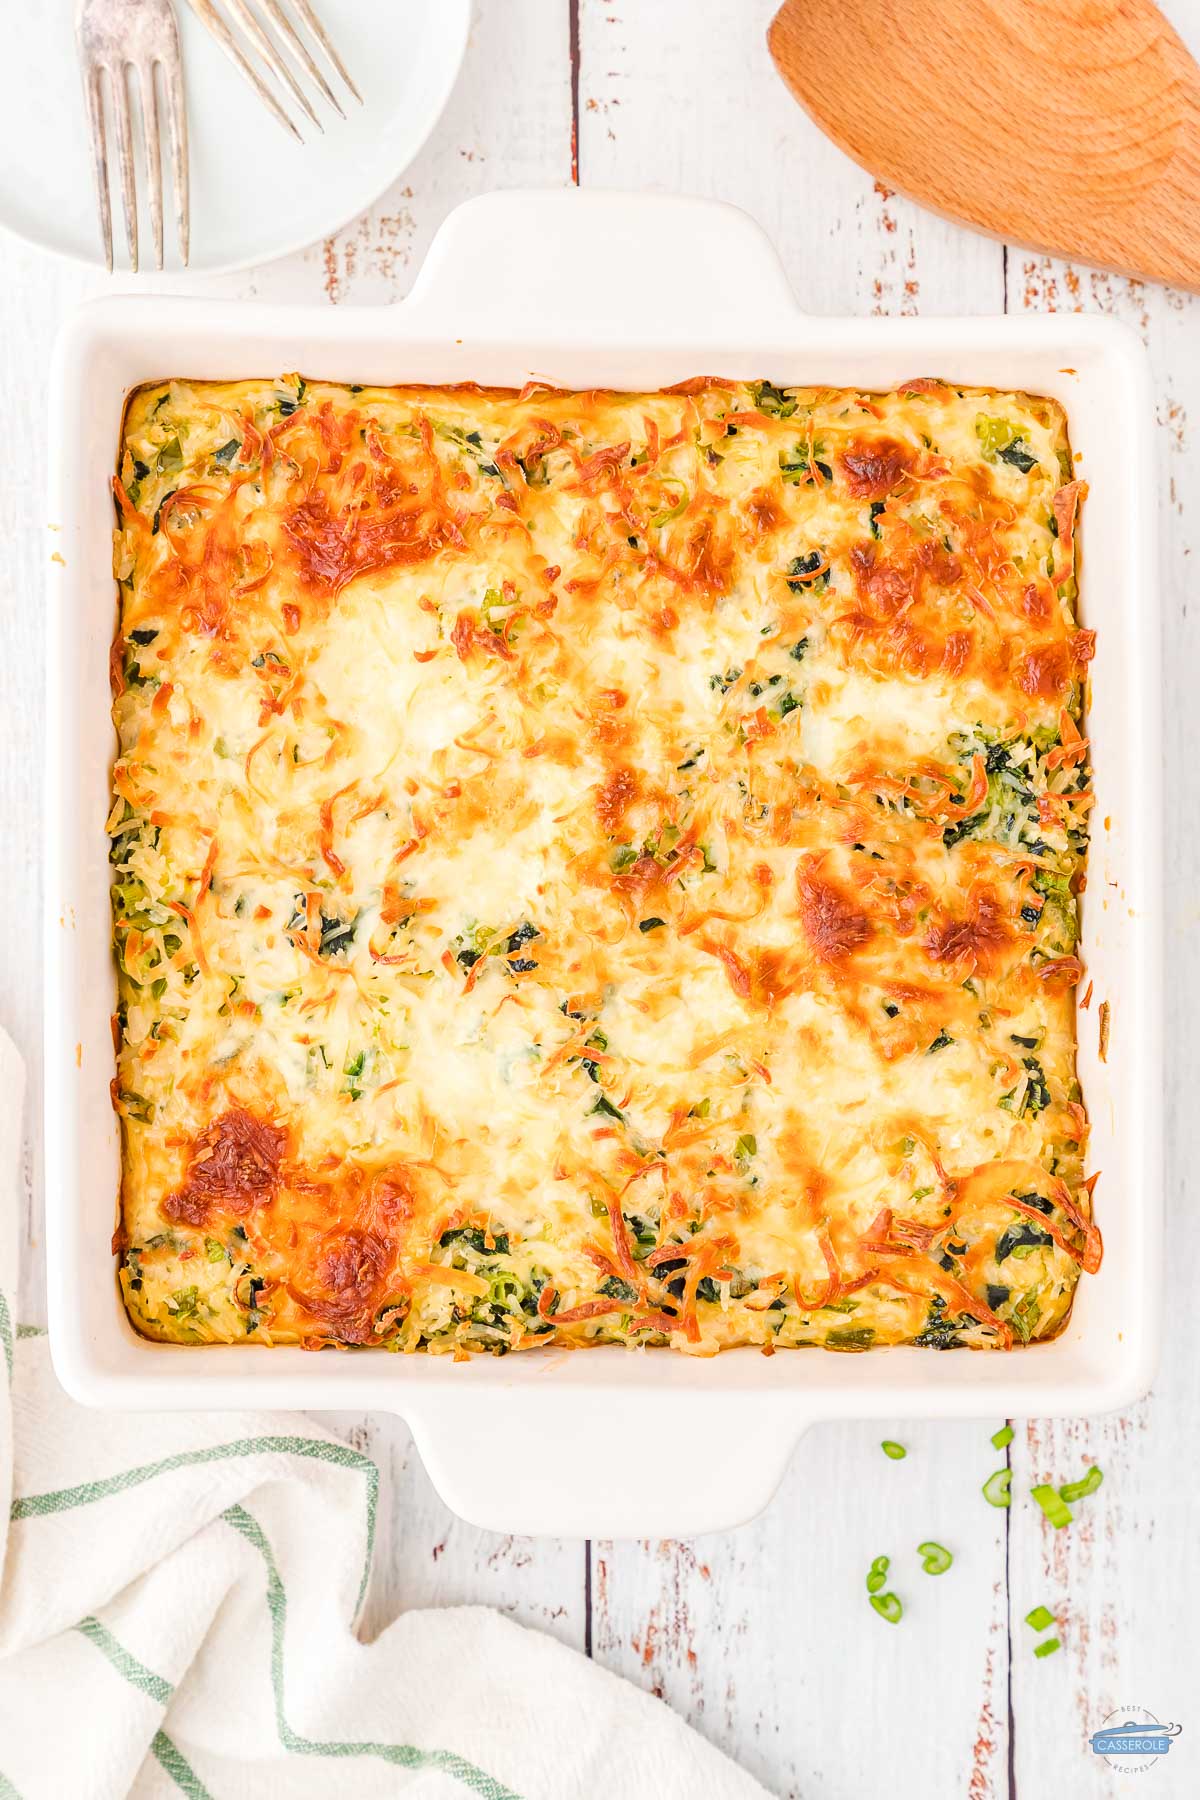 baked casserole dish with golden brown cheese on top